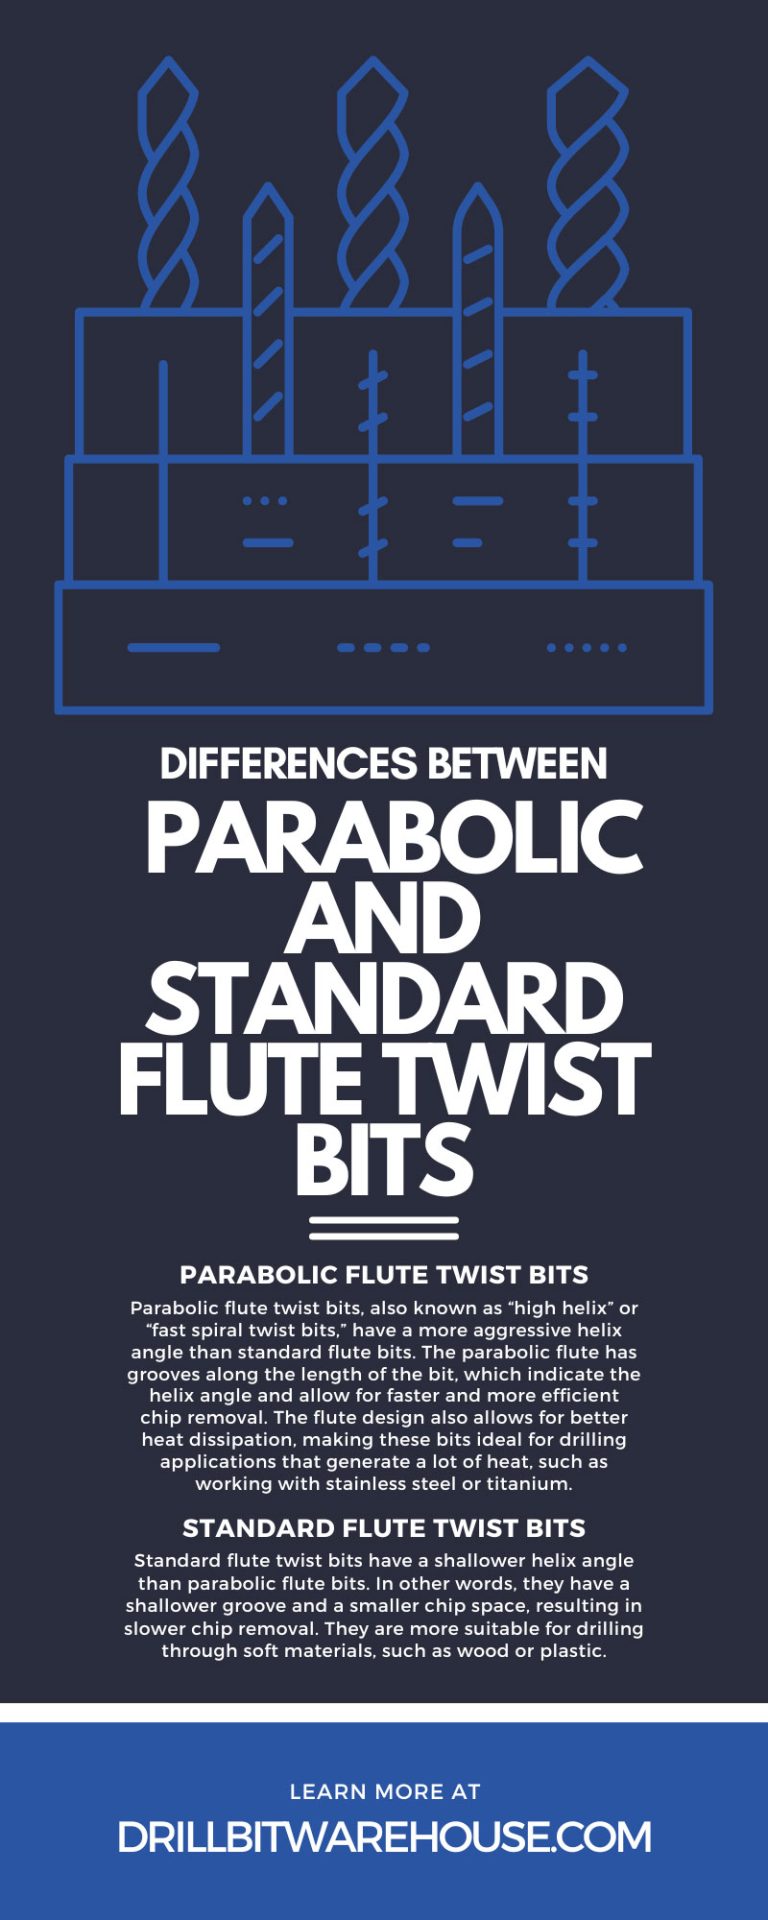 Differences Between Parabolic and Standard Flute Twist Bits